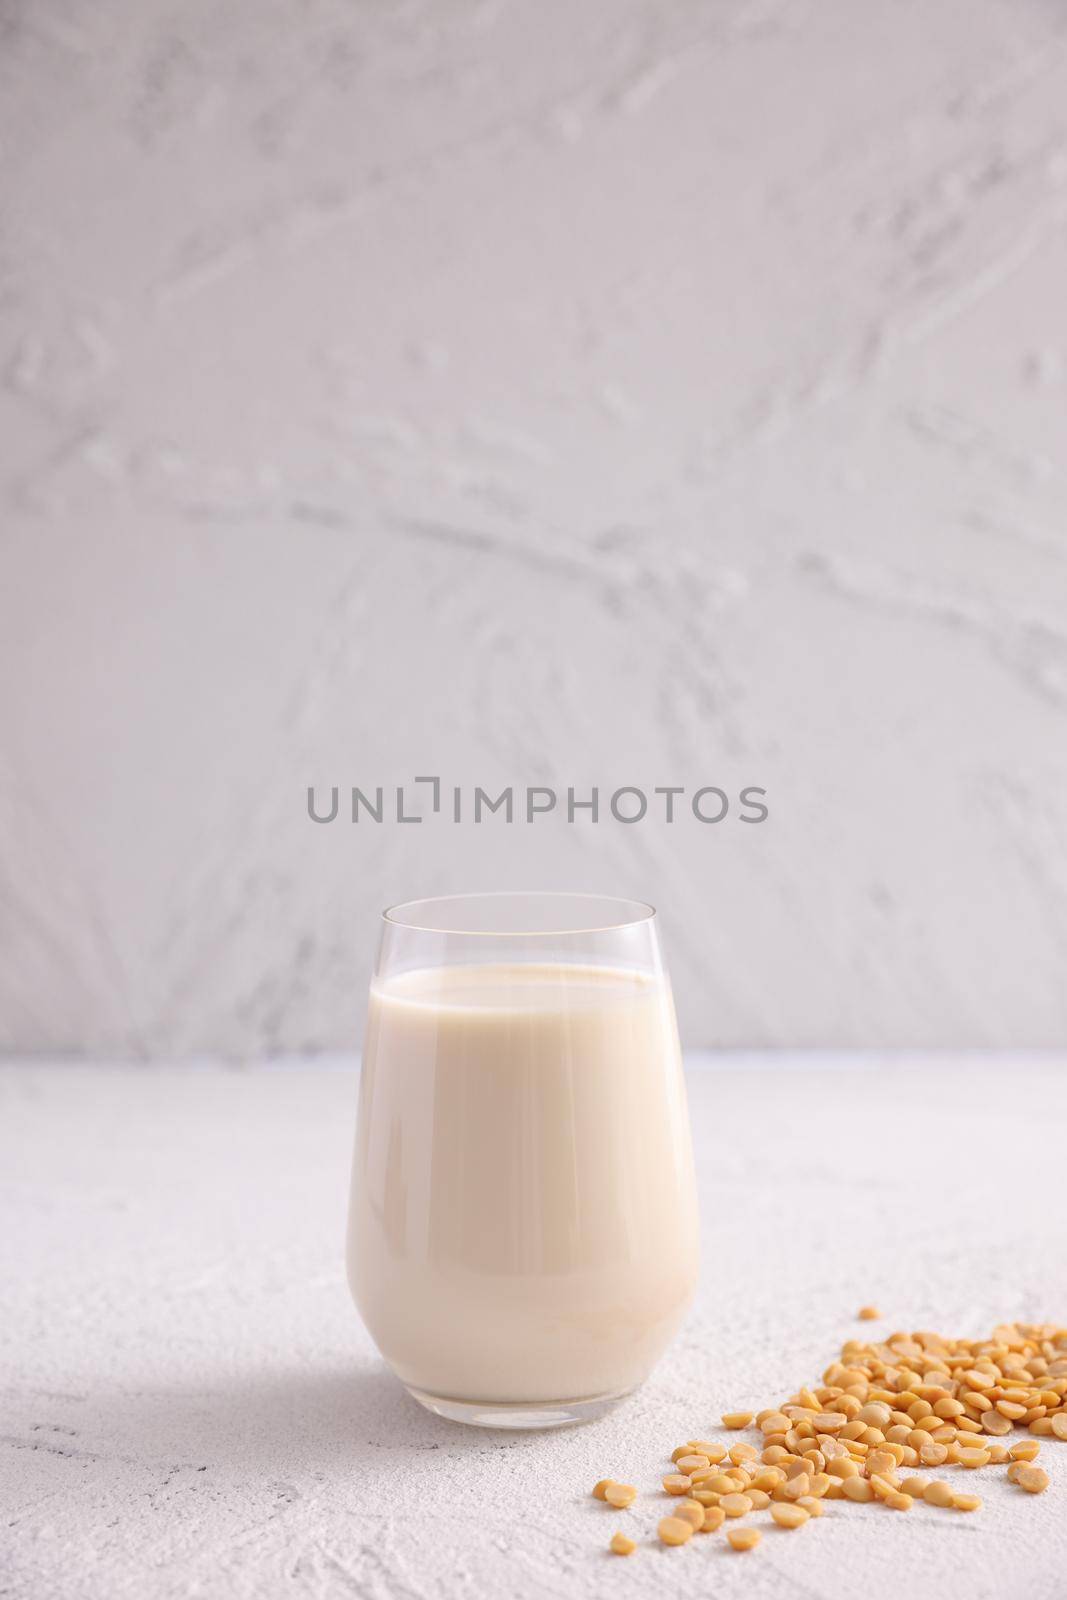 Soy milk in glass and soy bean isolated in white background by piyato